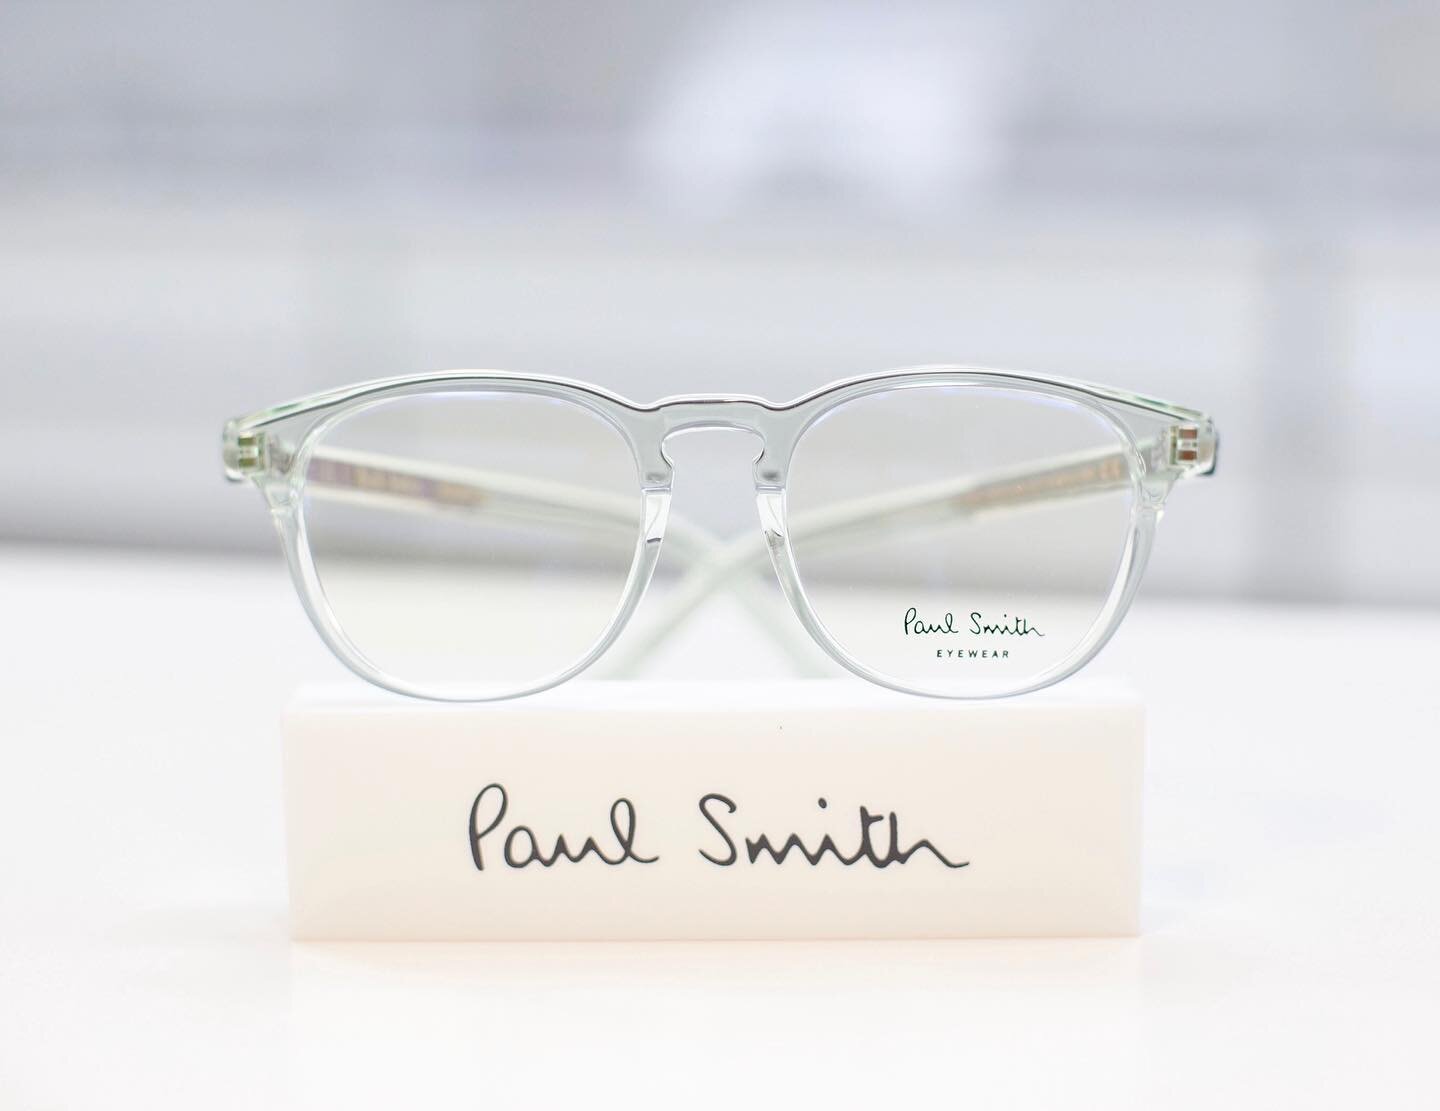 We are loving this new in @paulsmithdesign frame! 
An on trend translucent frame with a twist, adding a soft pastel hue to create a subtle green acetate frame 👓 &bull;
&bull;
&bull;
#Falmouth #cornwall #opticians #glasses #eyewearblogger #alexanderm